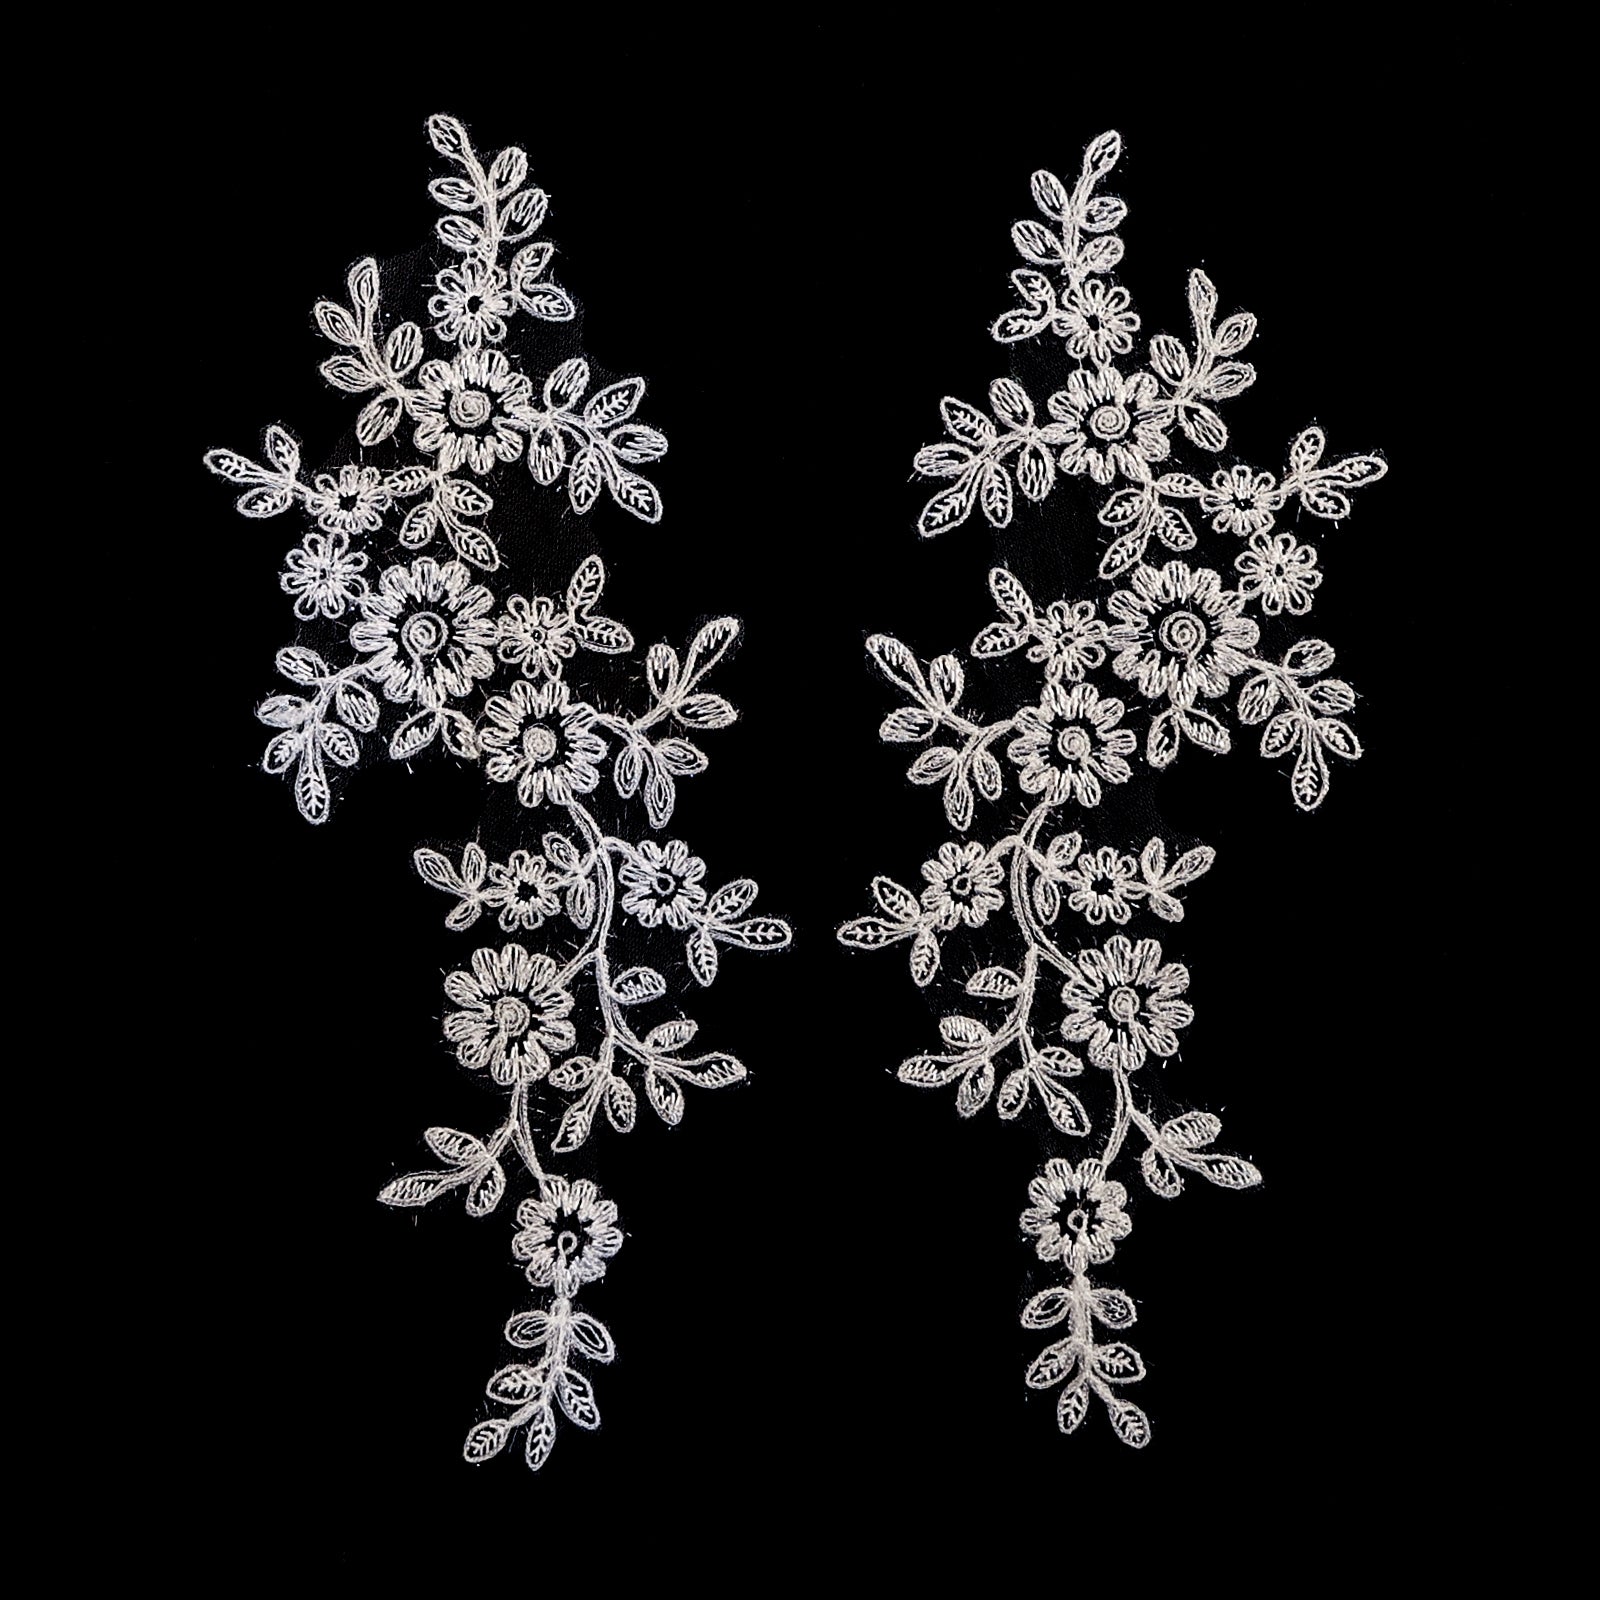 White floral applique embroidered with sparkly eye lash glitter thread.  The appliques are laying flat on a black background. 